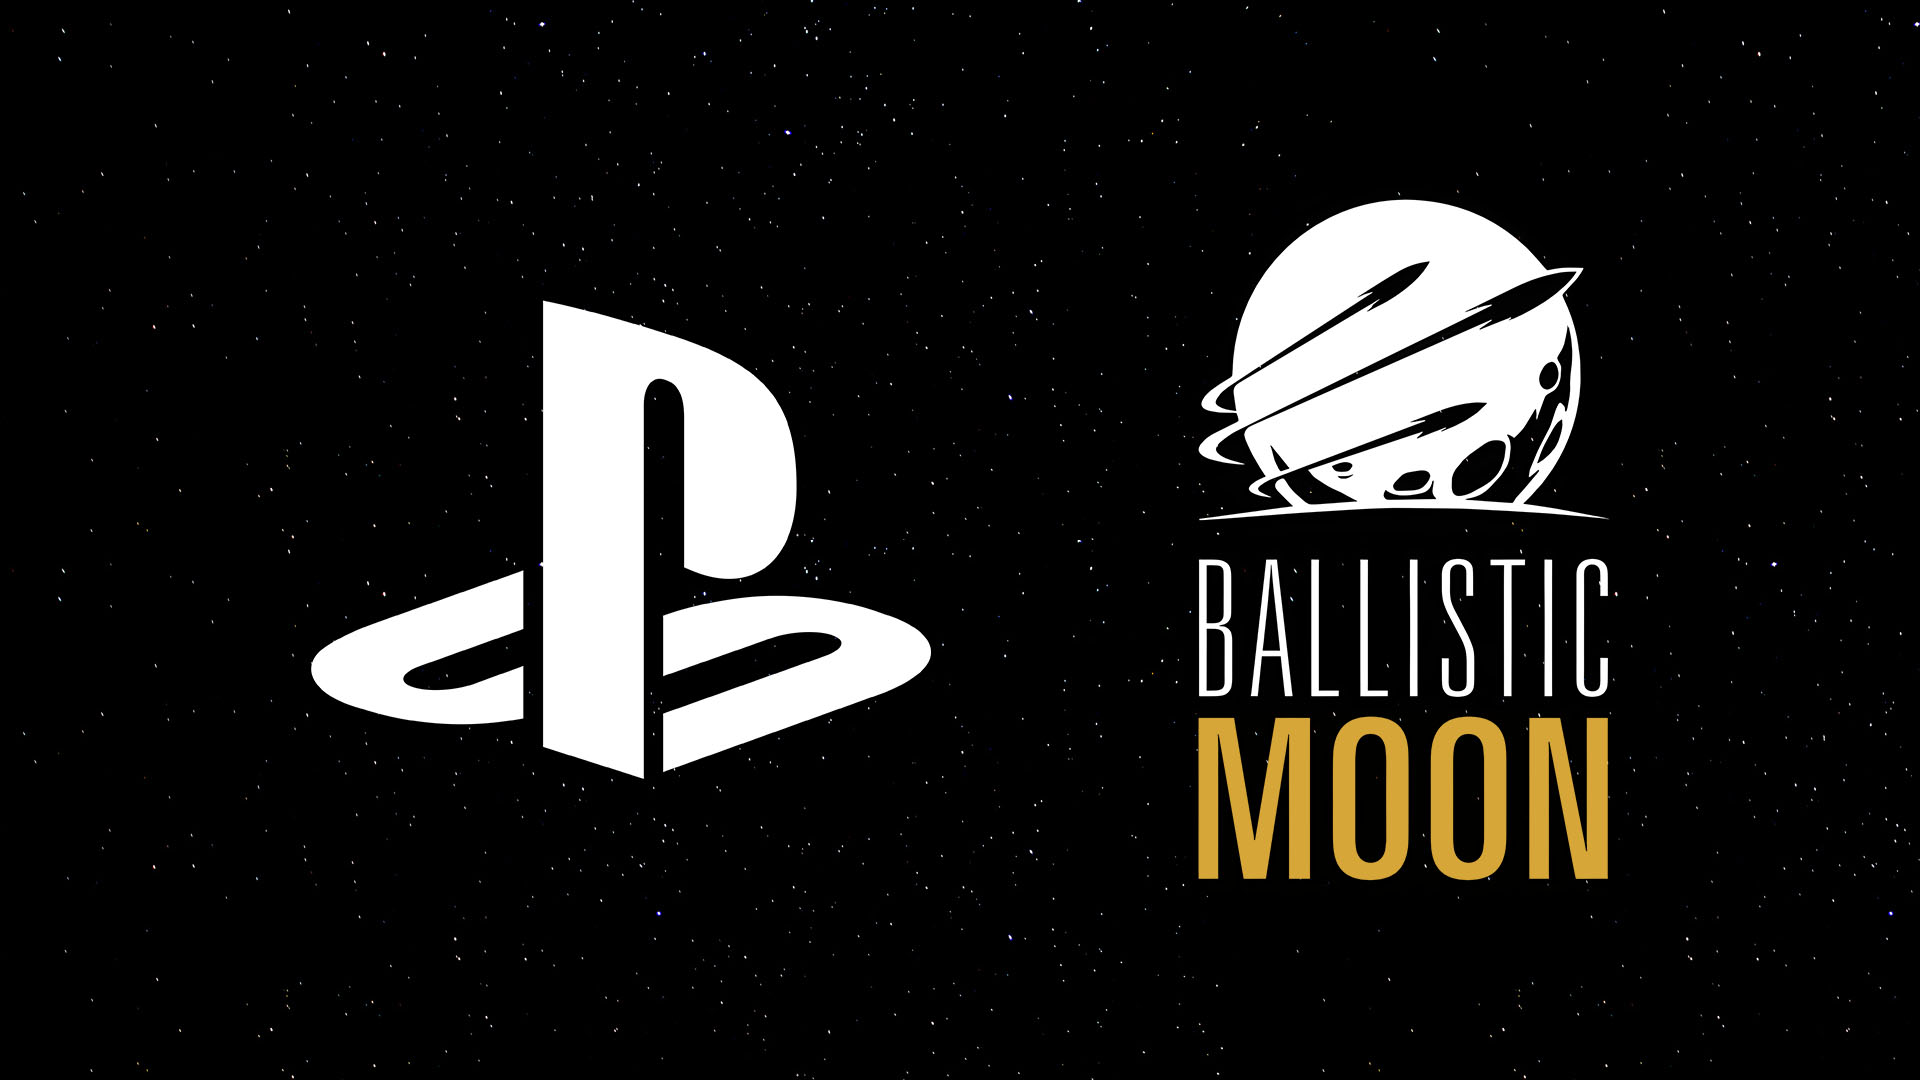 #
      Sony Interactive Entertainment and Ballistic Moon working on new game, according to motion capture actor resume